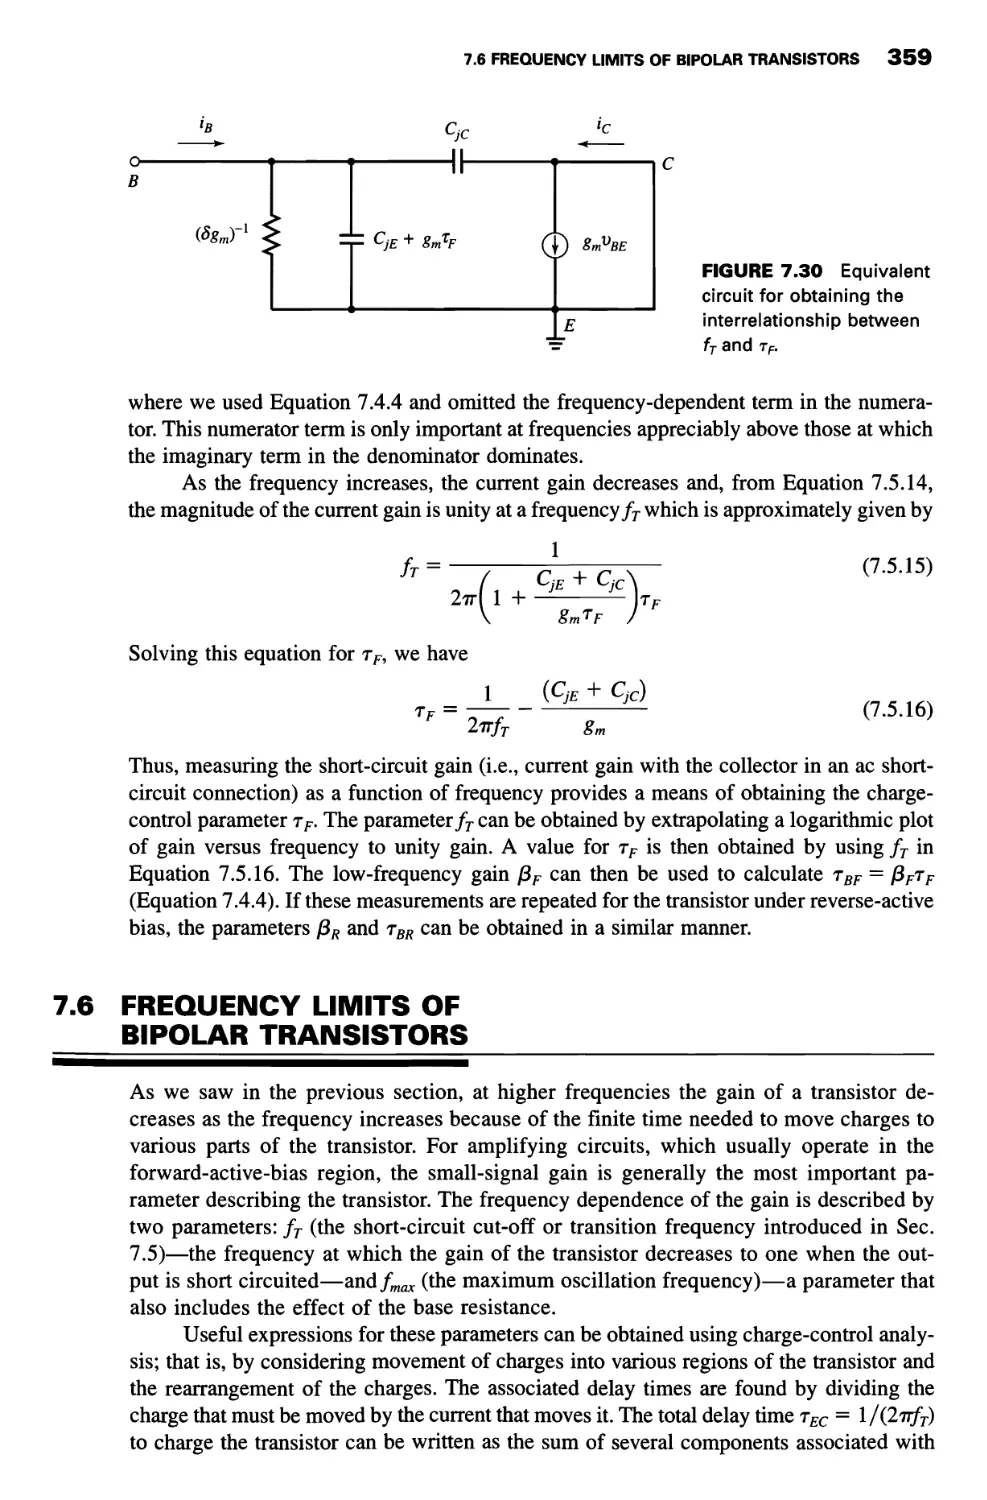 7.6 Frequency Limits of Bipolar Transistors